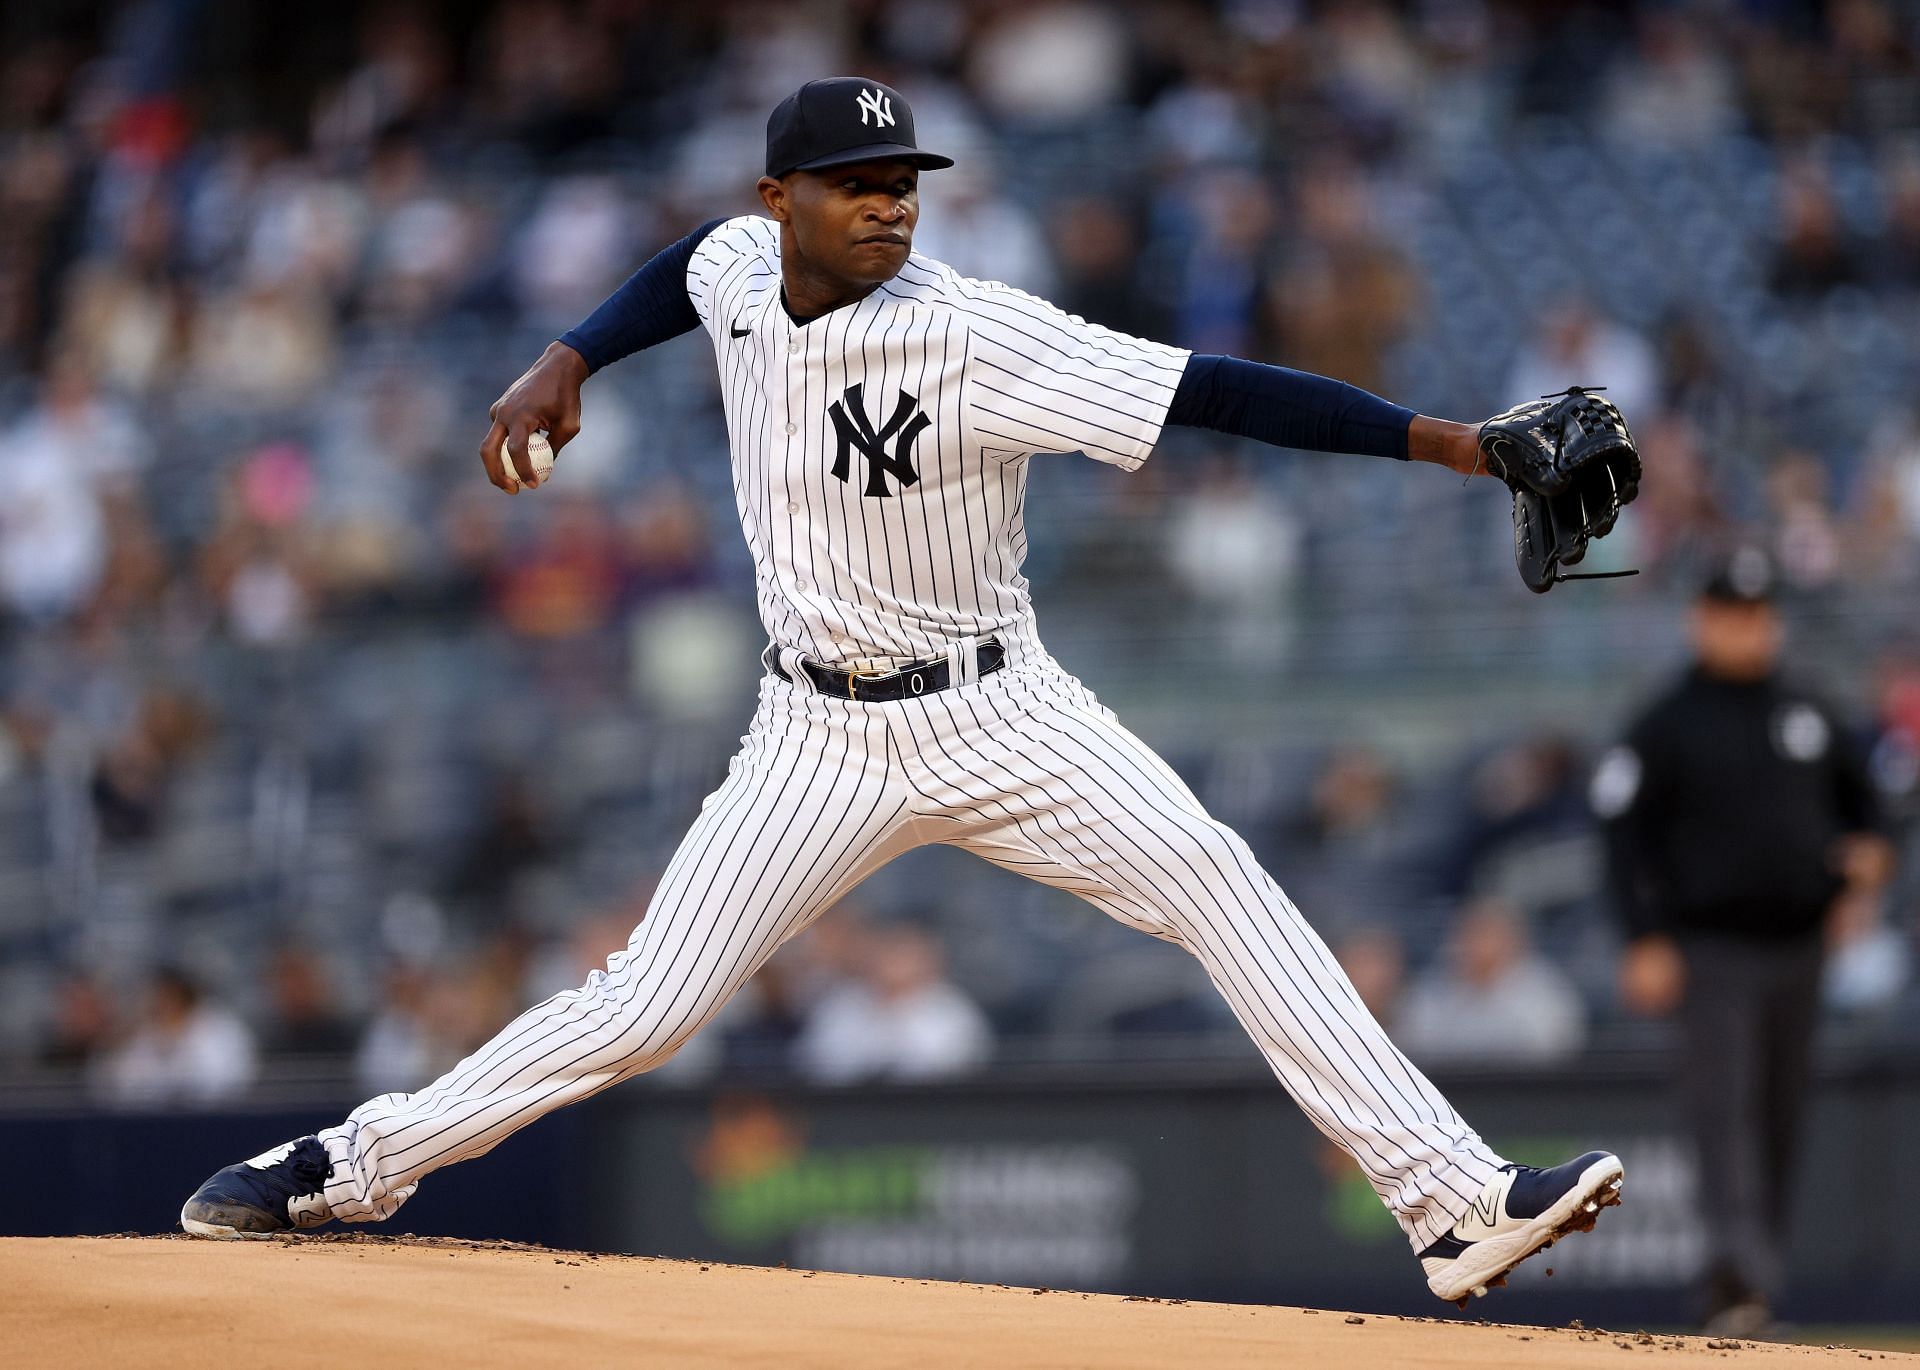 New York Yankees fans want Aaron Boone axed after he pulls Domingo German in ninth, bullpen blows lead, team loses again